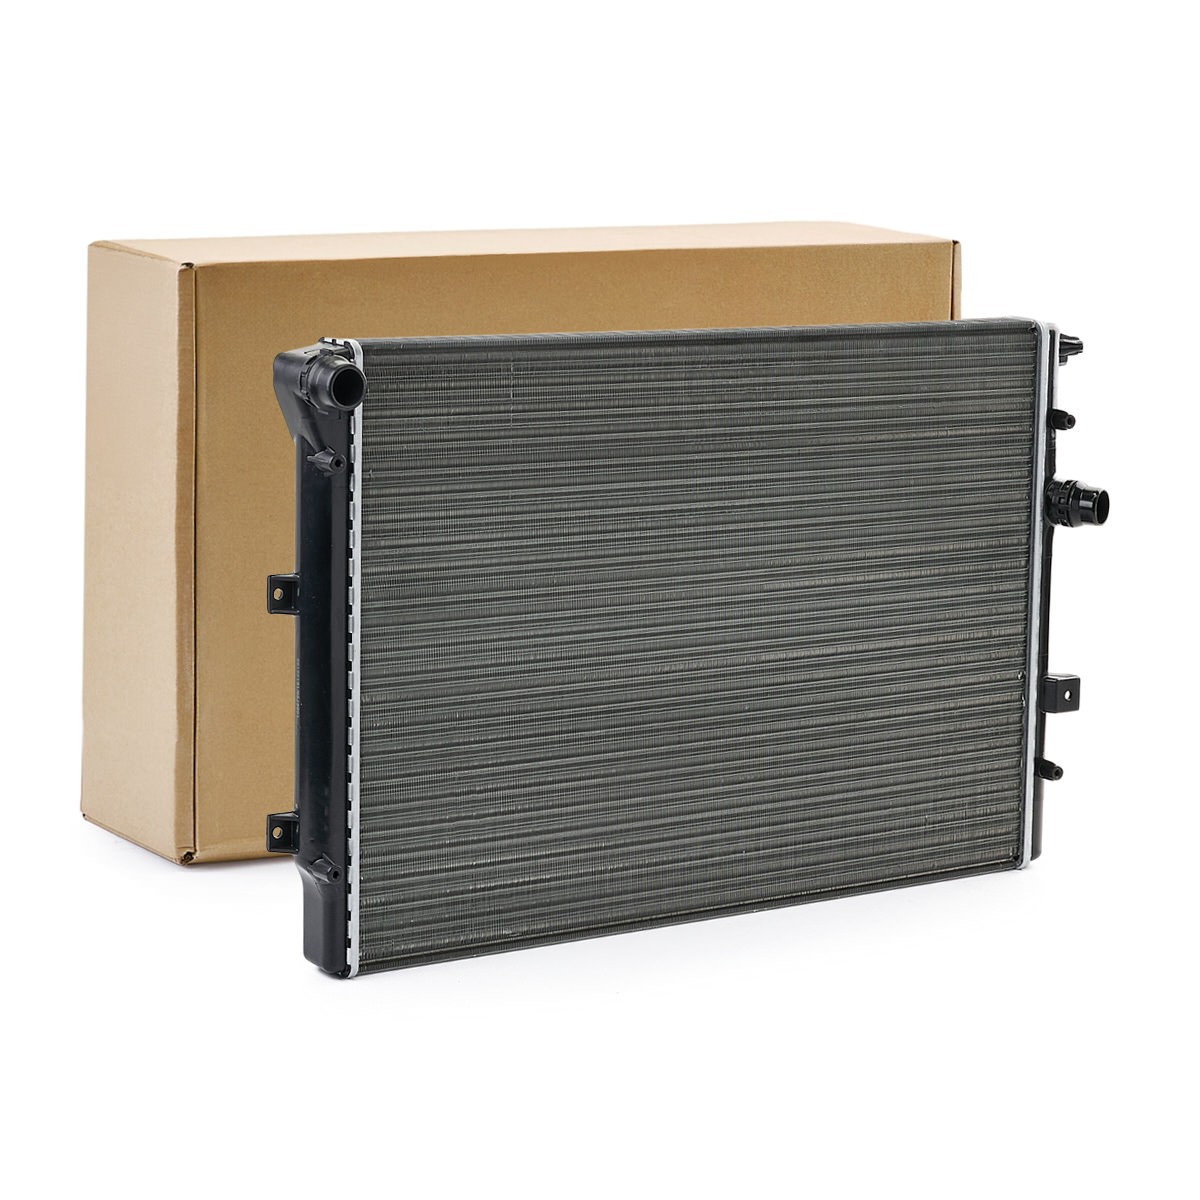 RIDEX 470R1032 Engine radiator Aluminium, Plastic, for vehicles with/without air conditioning, Manual Transmission